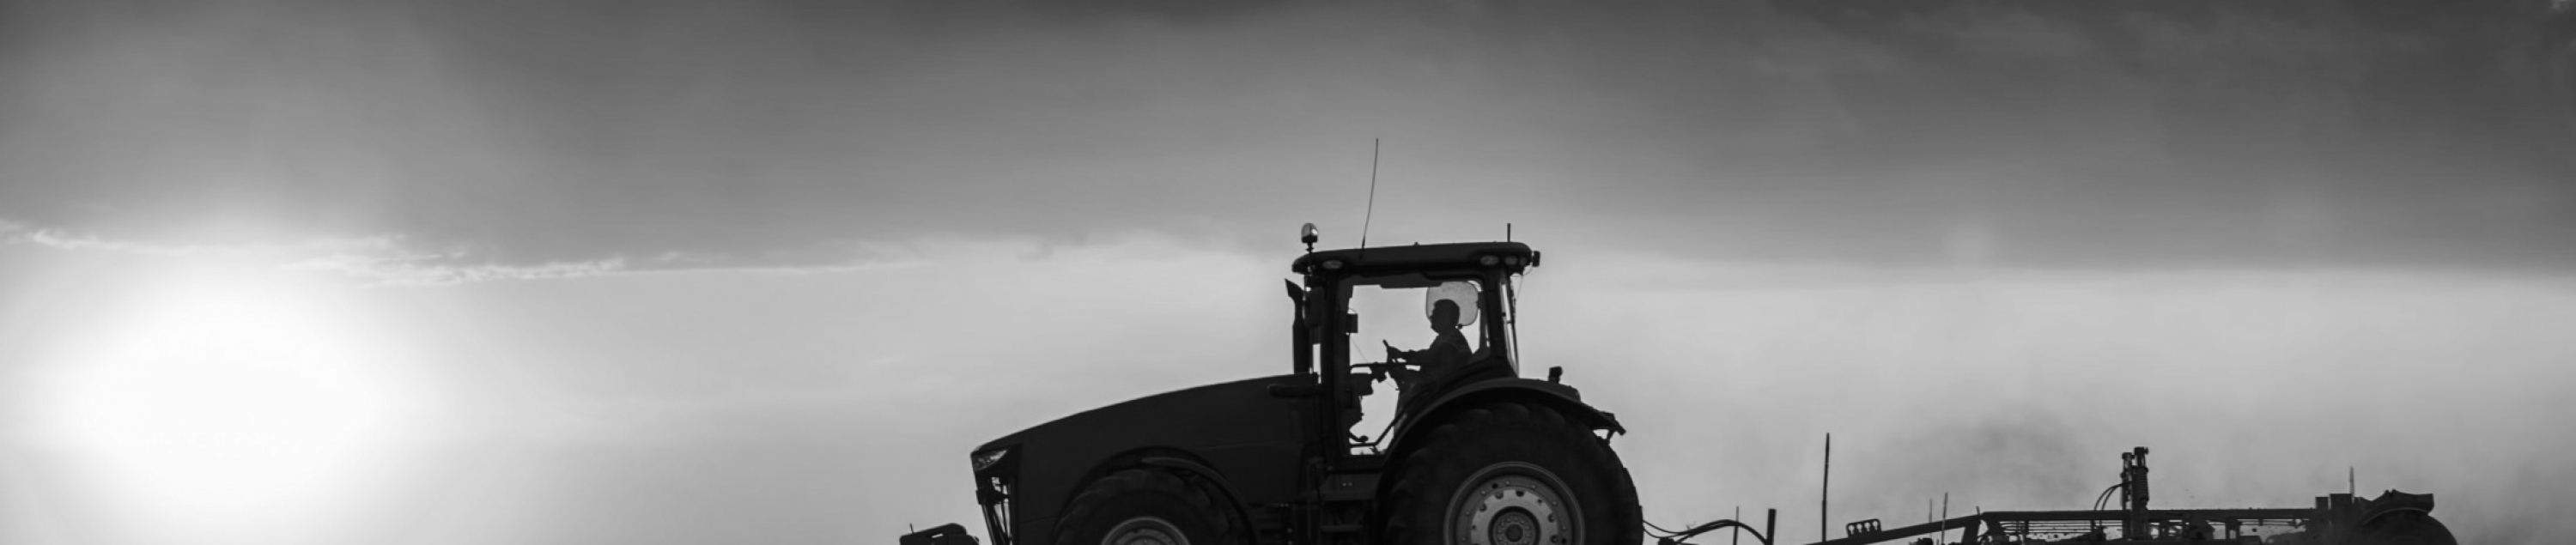 Sears Seating wins Agriculture Technology Award, AE50. Image of tractor in field